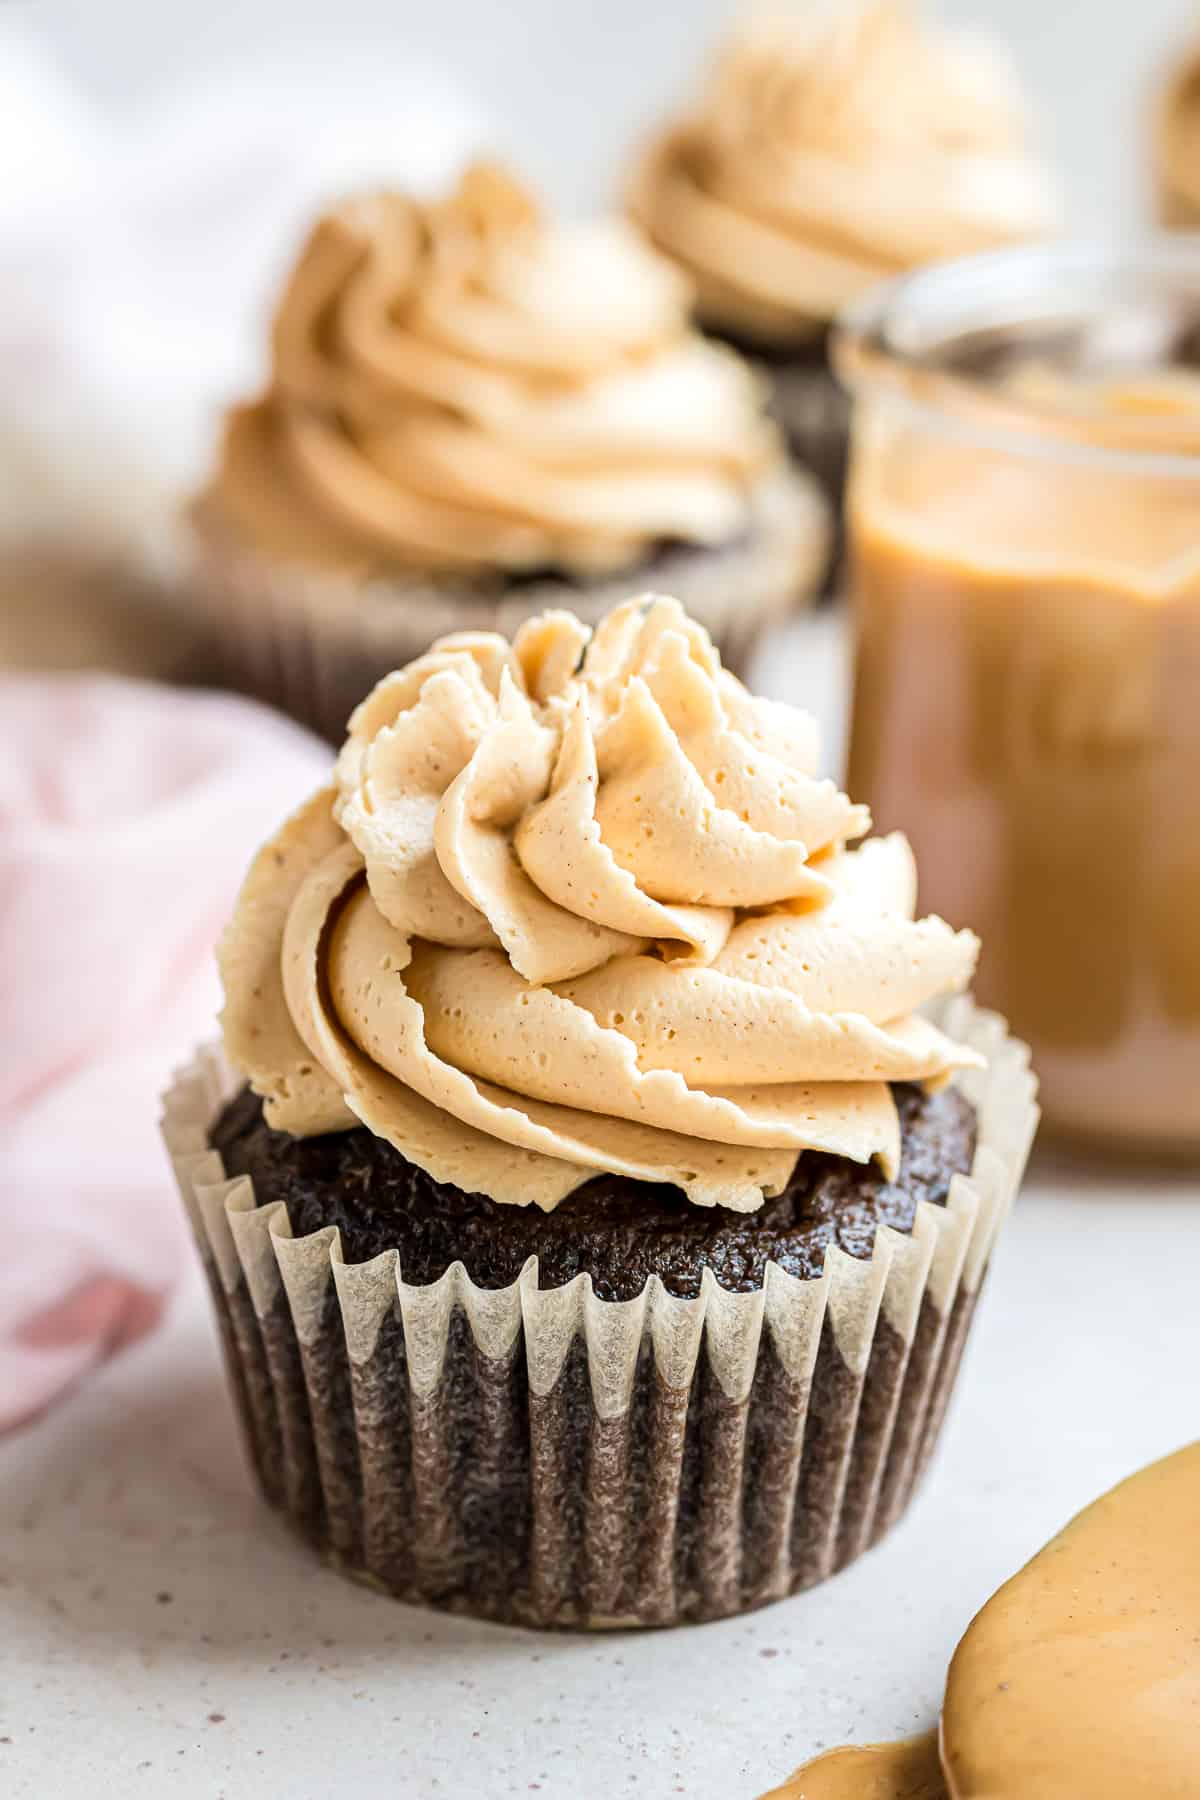 Peanut butter frosting piped on a chocolate cupcake.